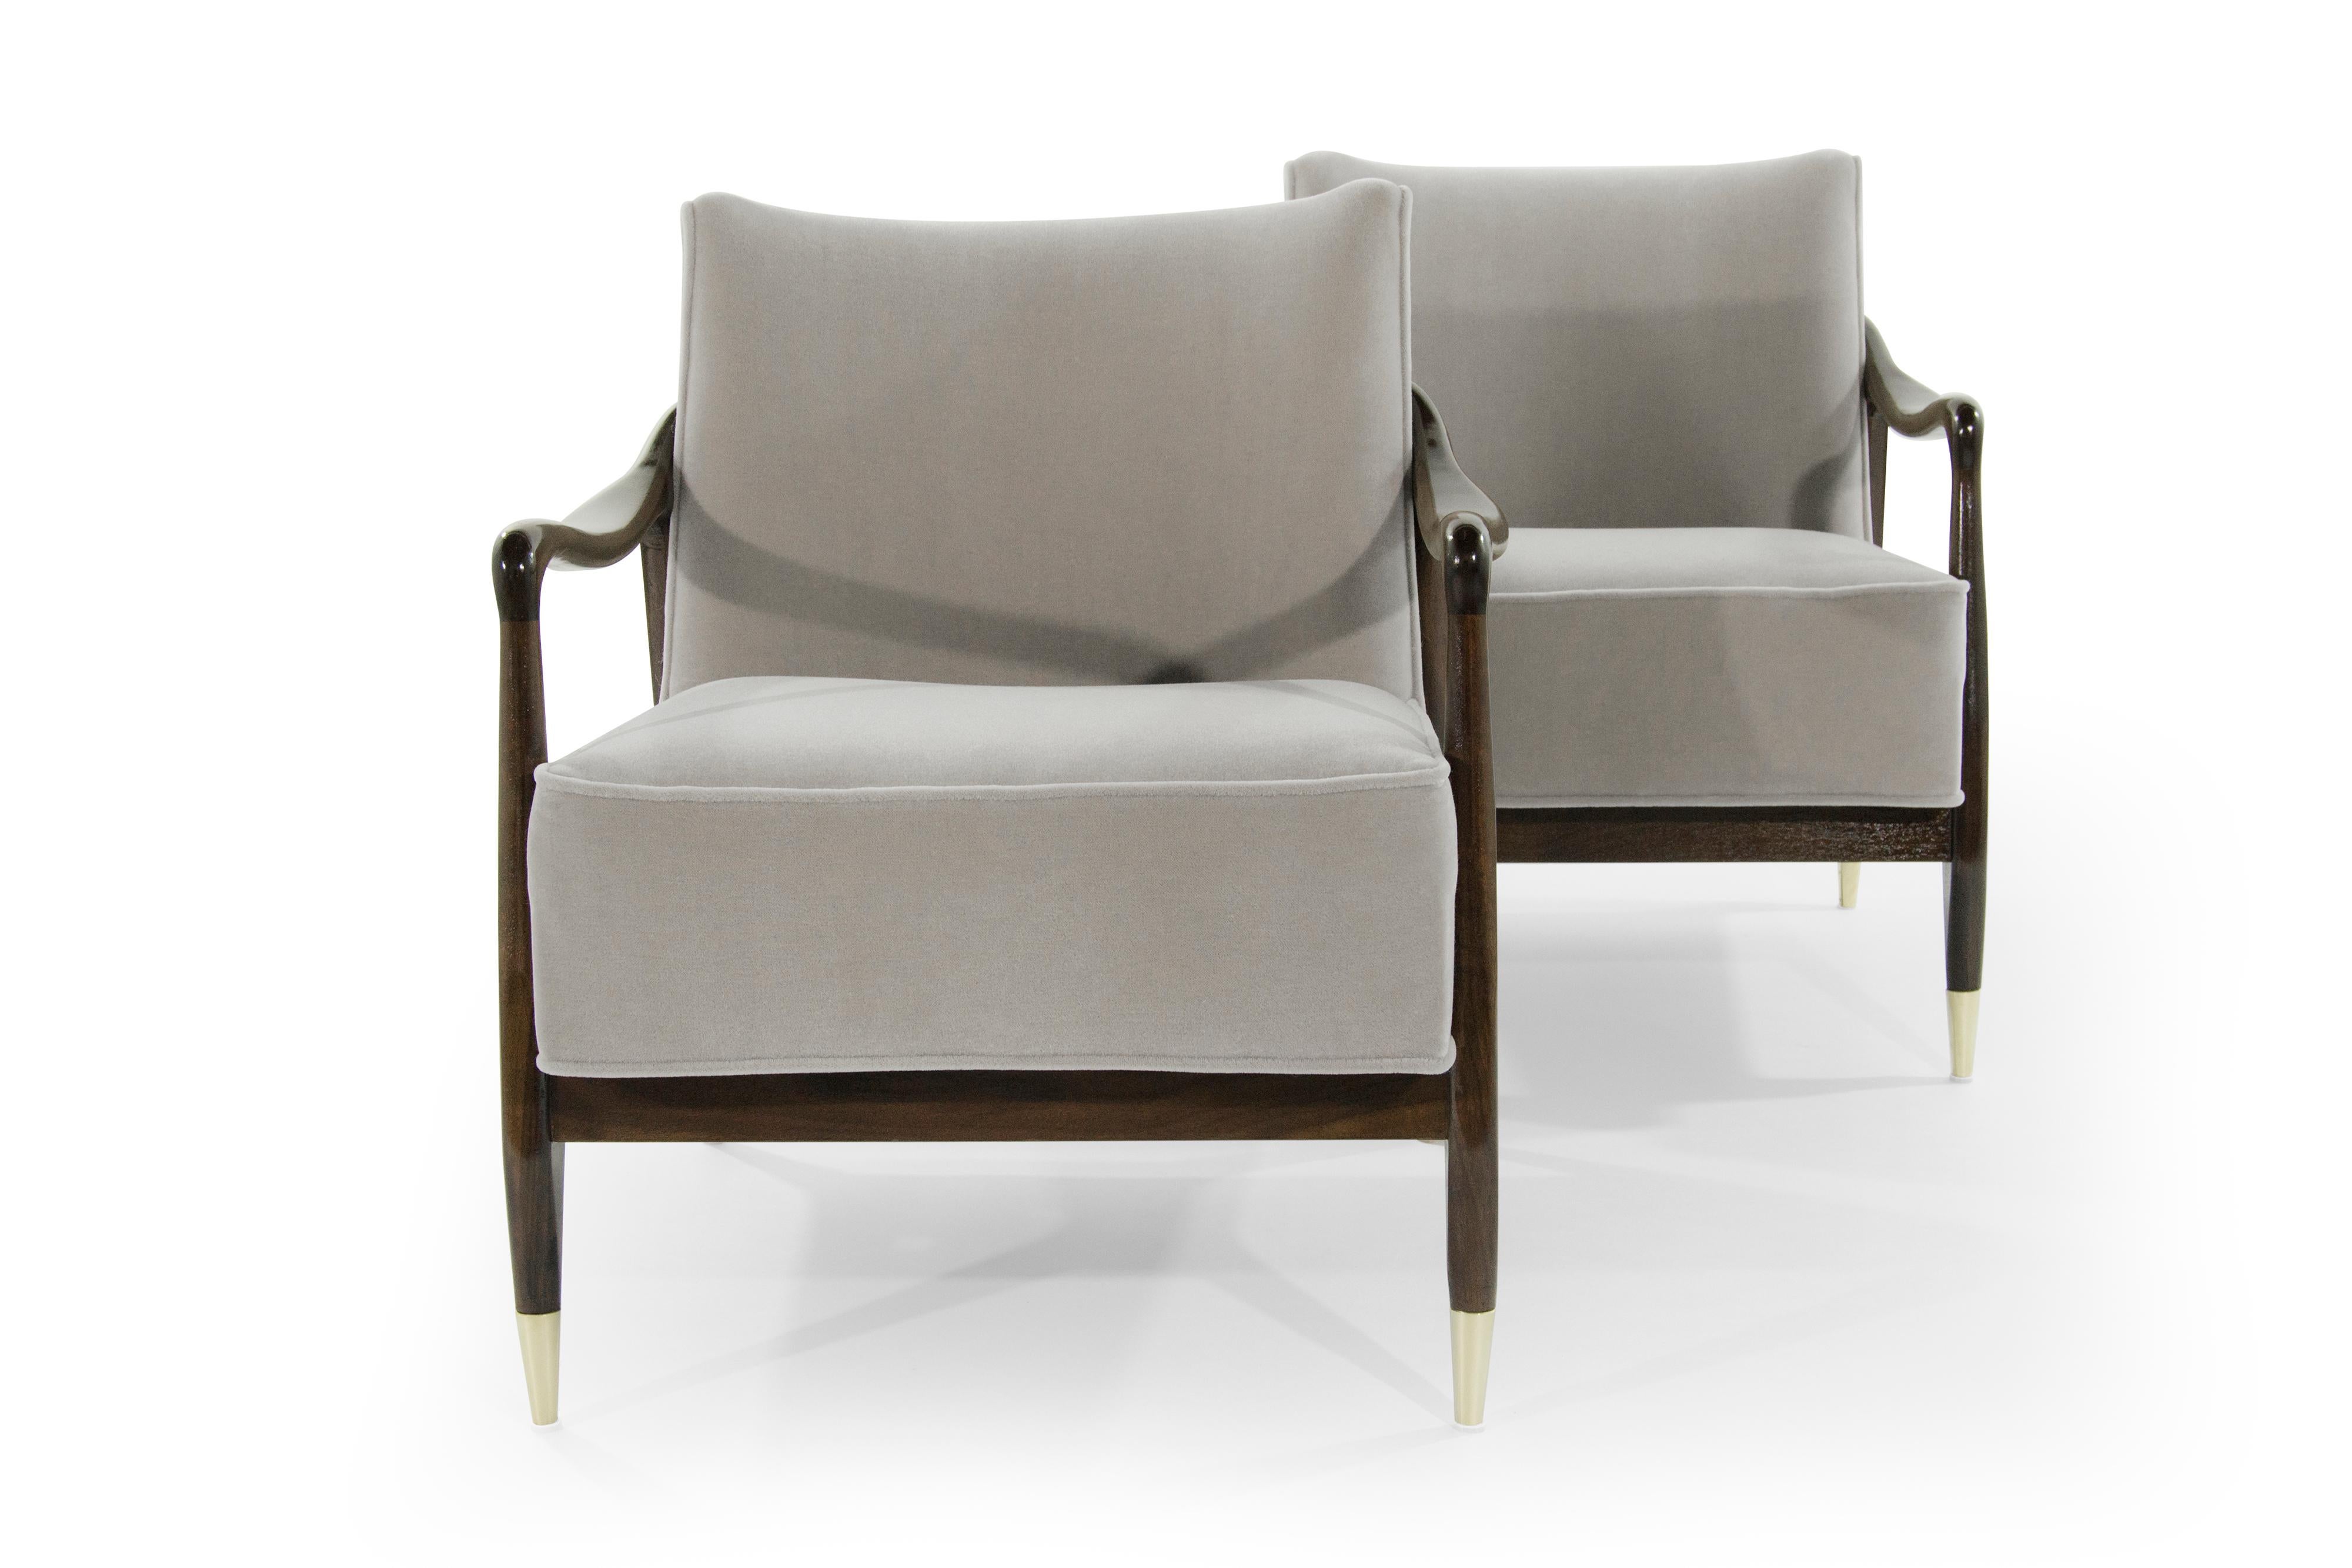 American Midcentury Sculptural Gio Ponti Style Walnut Lounge Chairs, 1950s